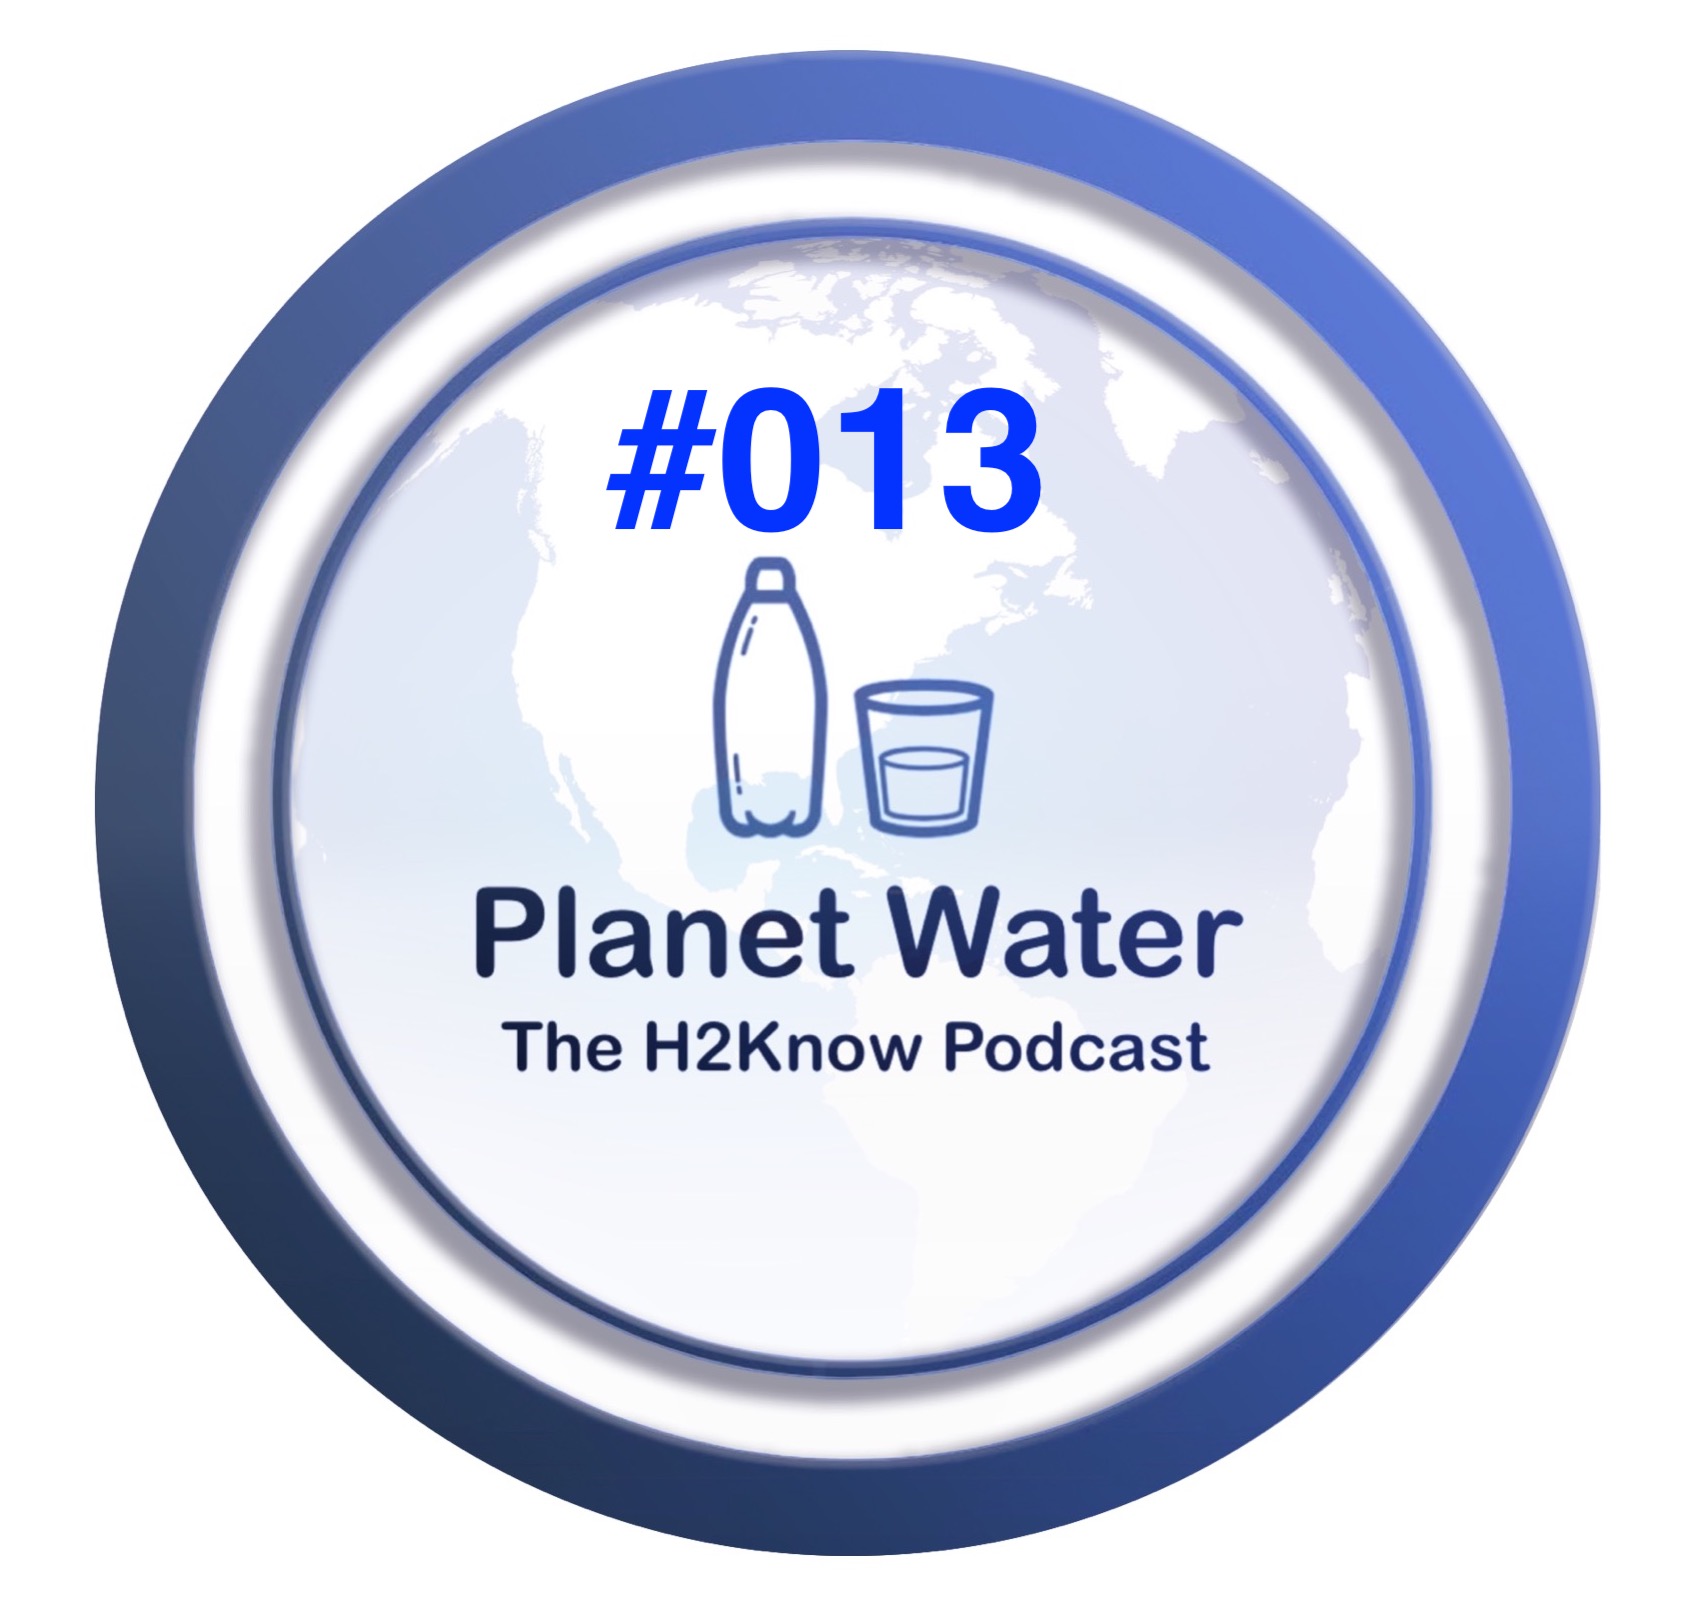 Planet Water - The H2Know Podcast with Martin Riese Episode #013 - Crazy Water with Marcella Arguello